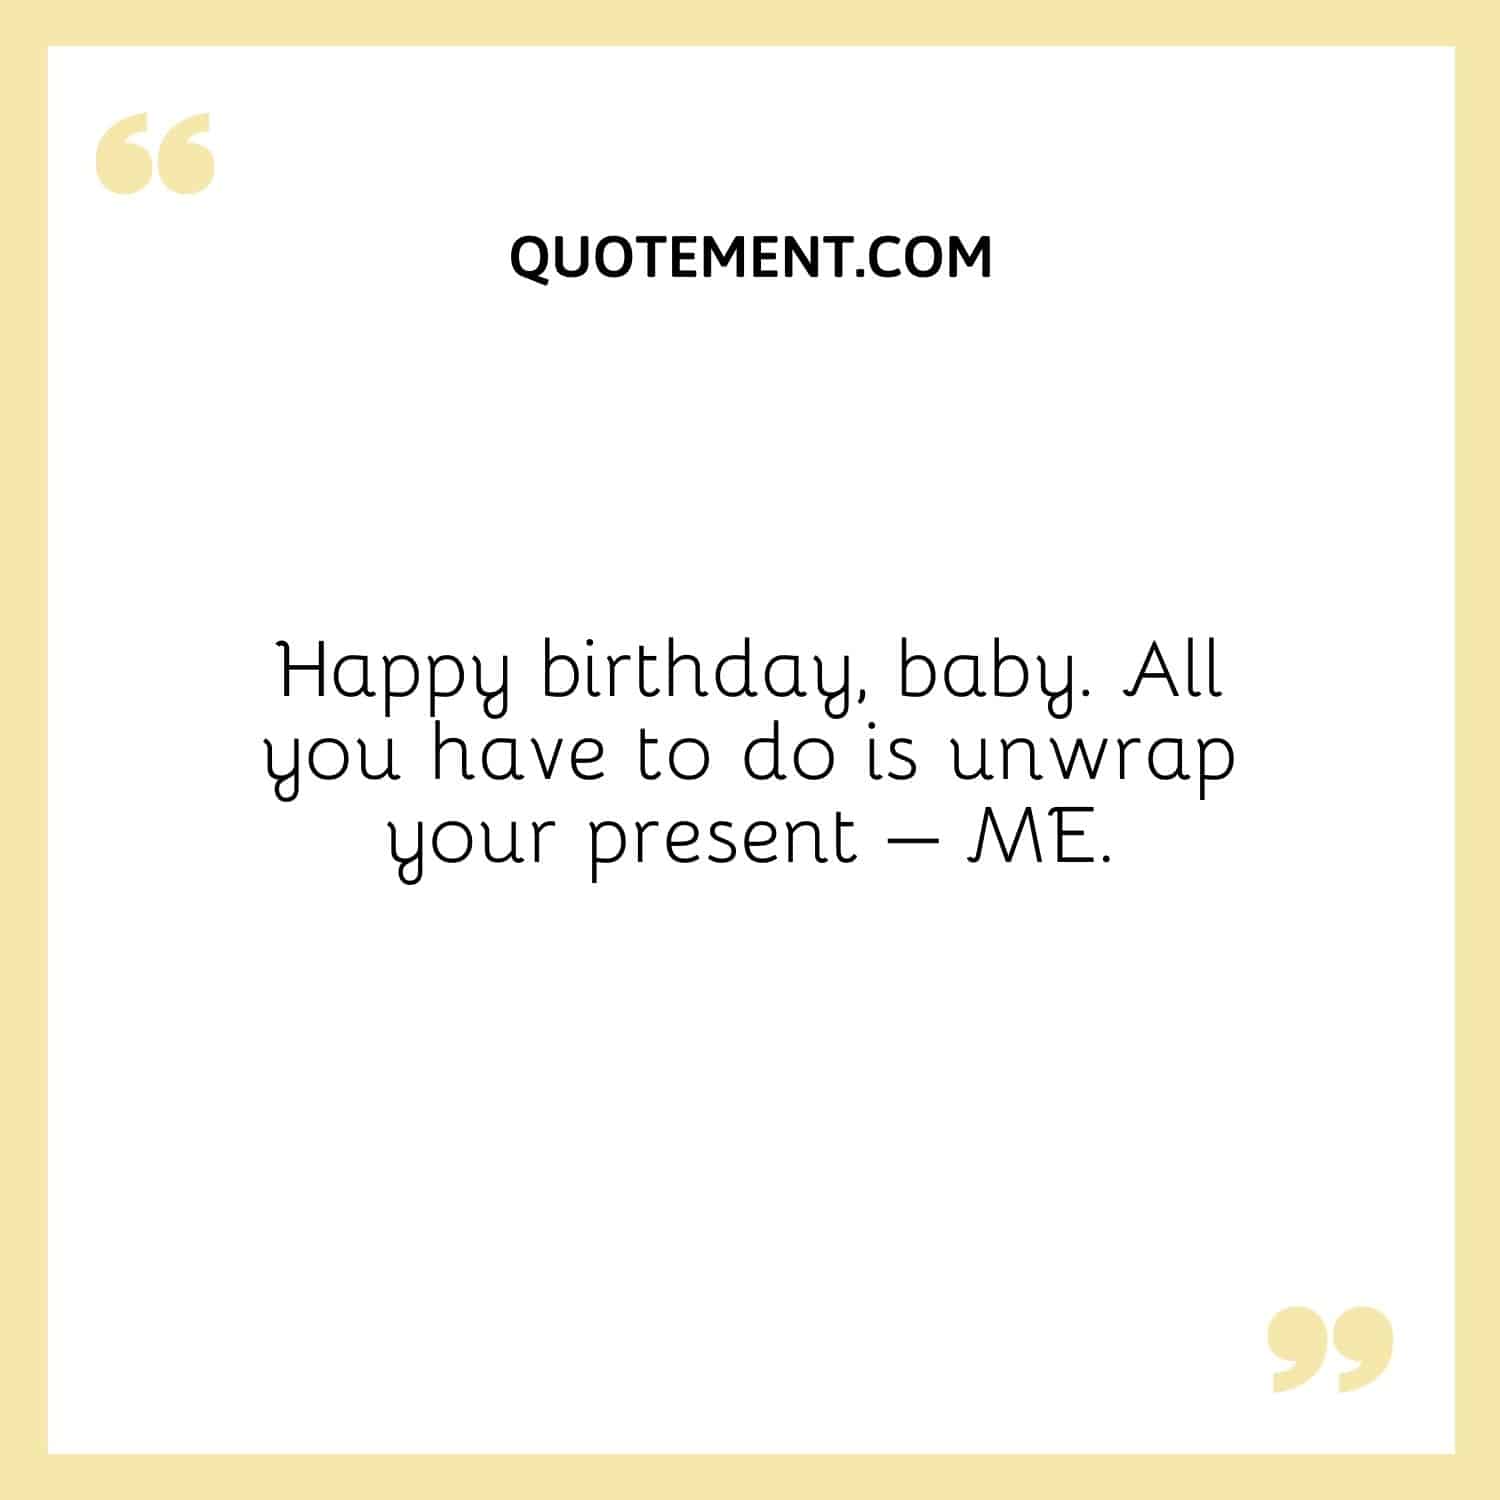 Happy birthday, baby. All you have to do is unwrap your present – ME